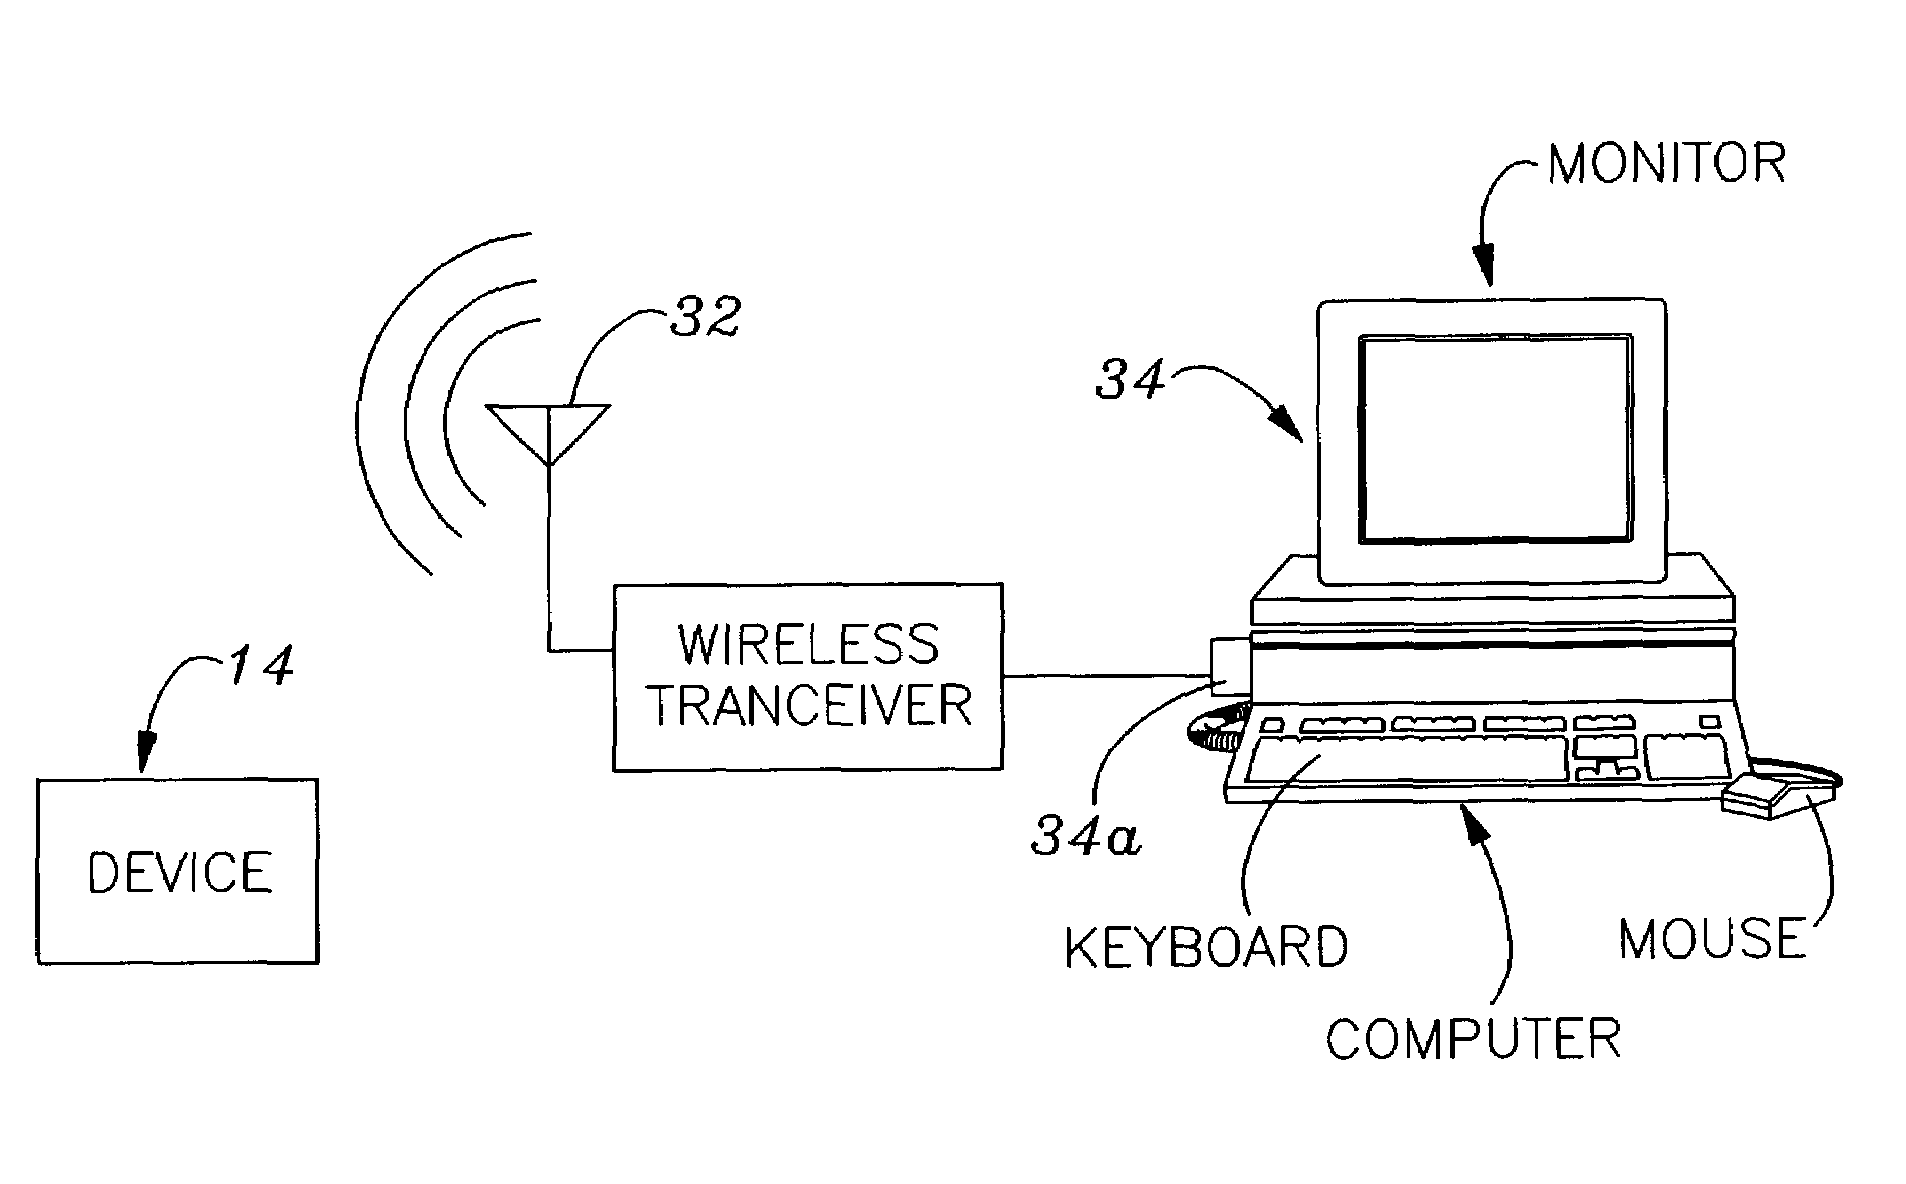 Apparatus for and method of creating and transmitting a prescription to a drug dispensing location